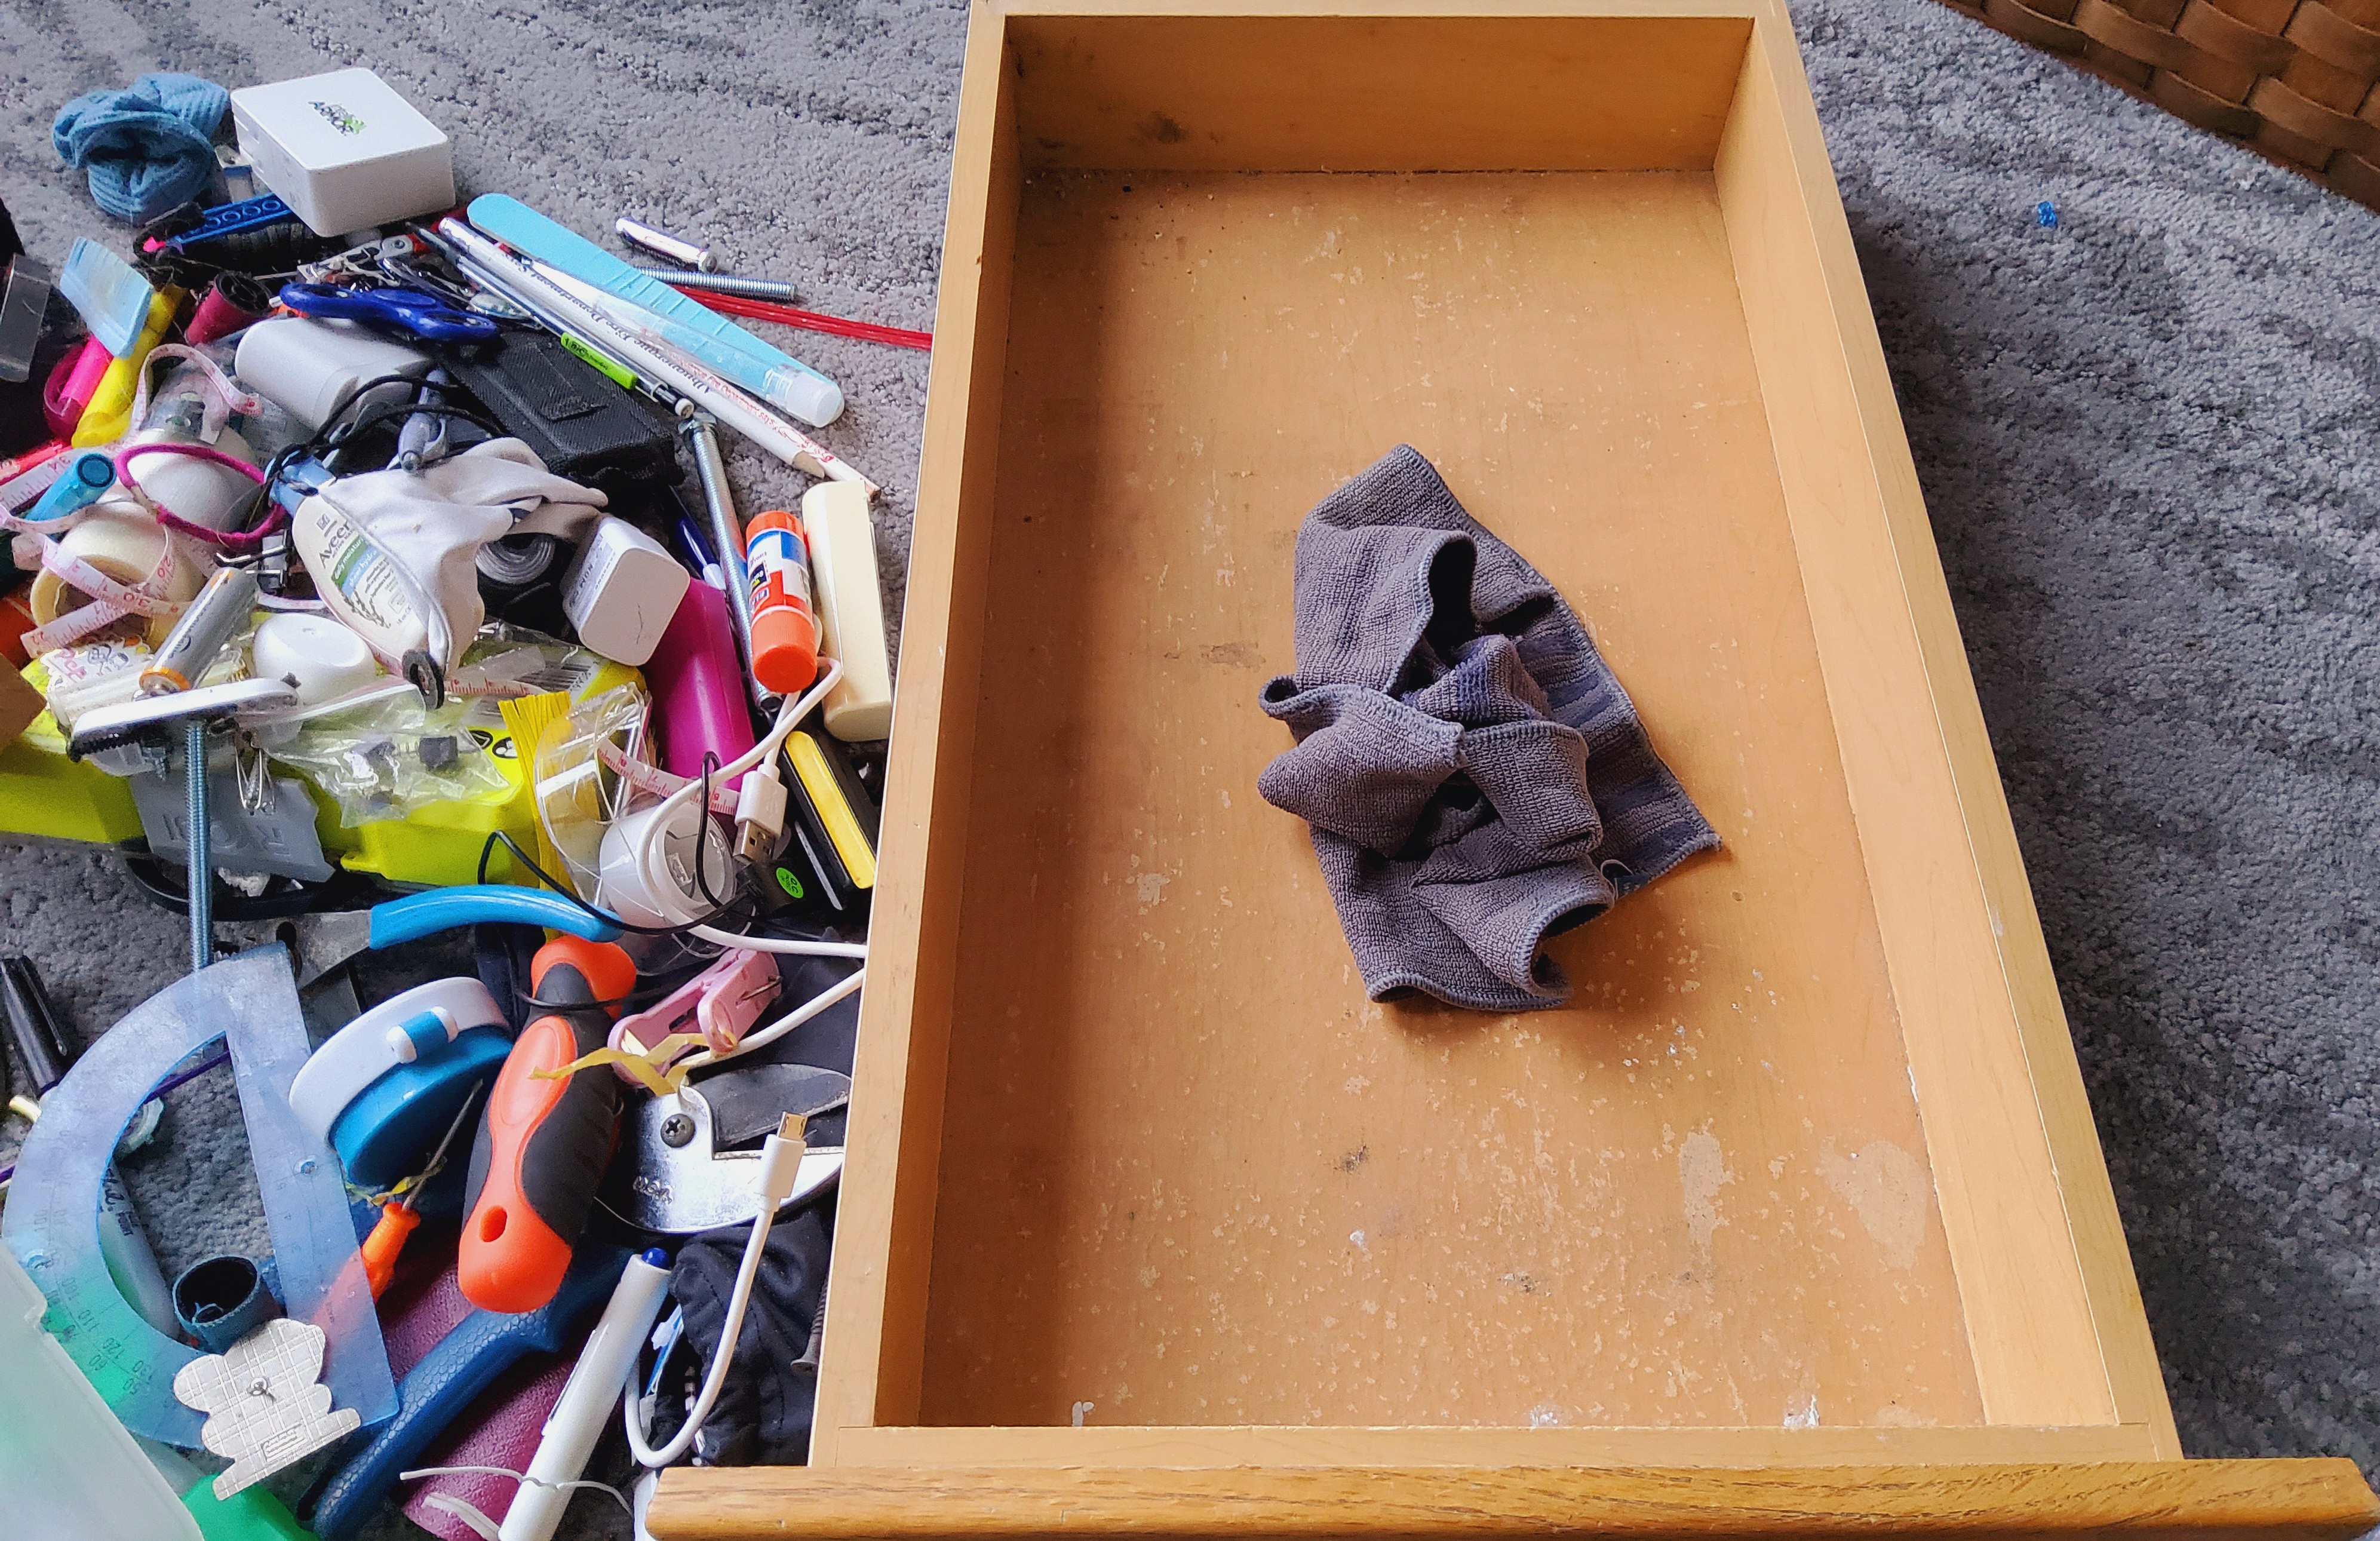 Taming the Junk Drawer! - Organized With Kids